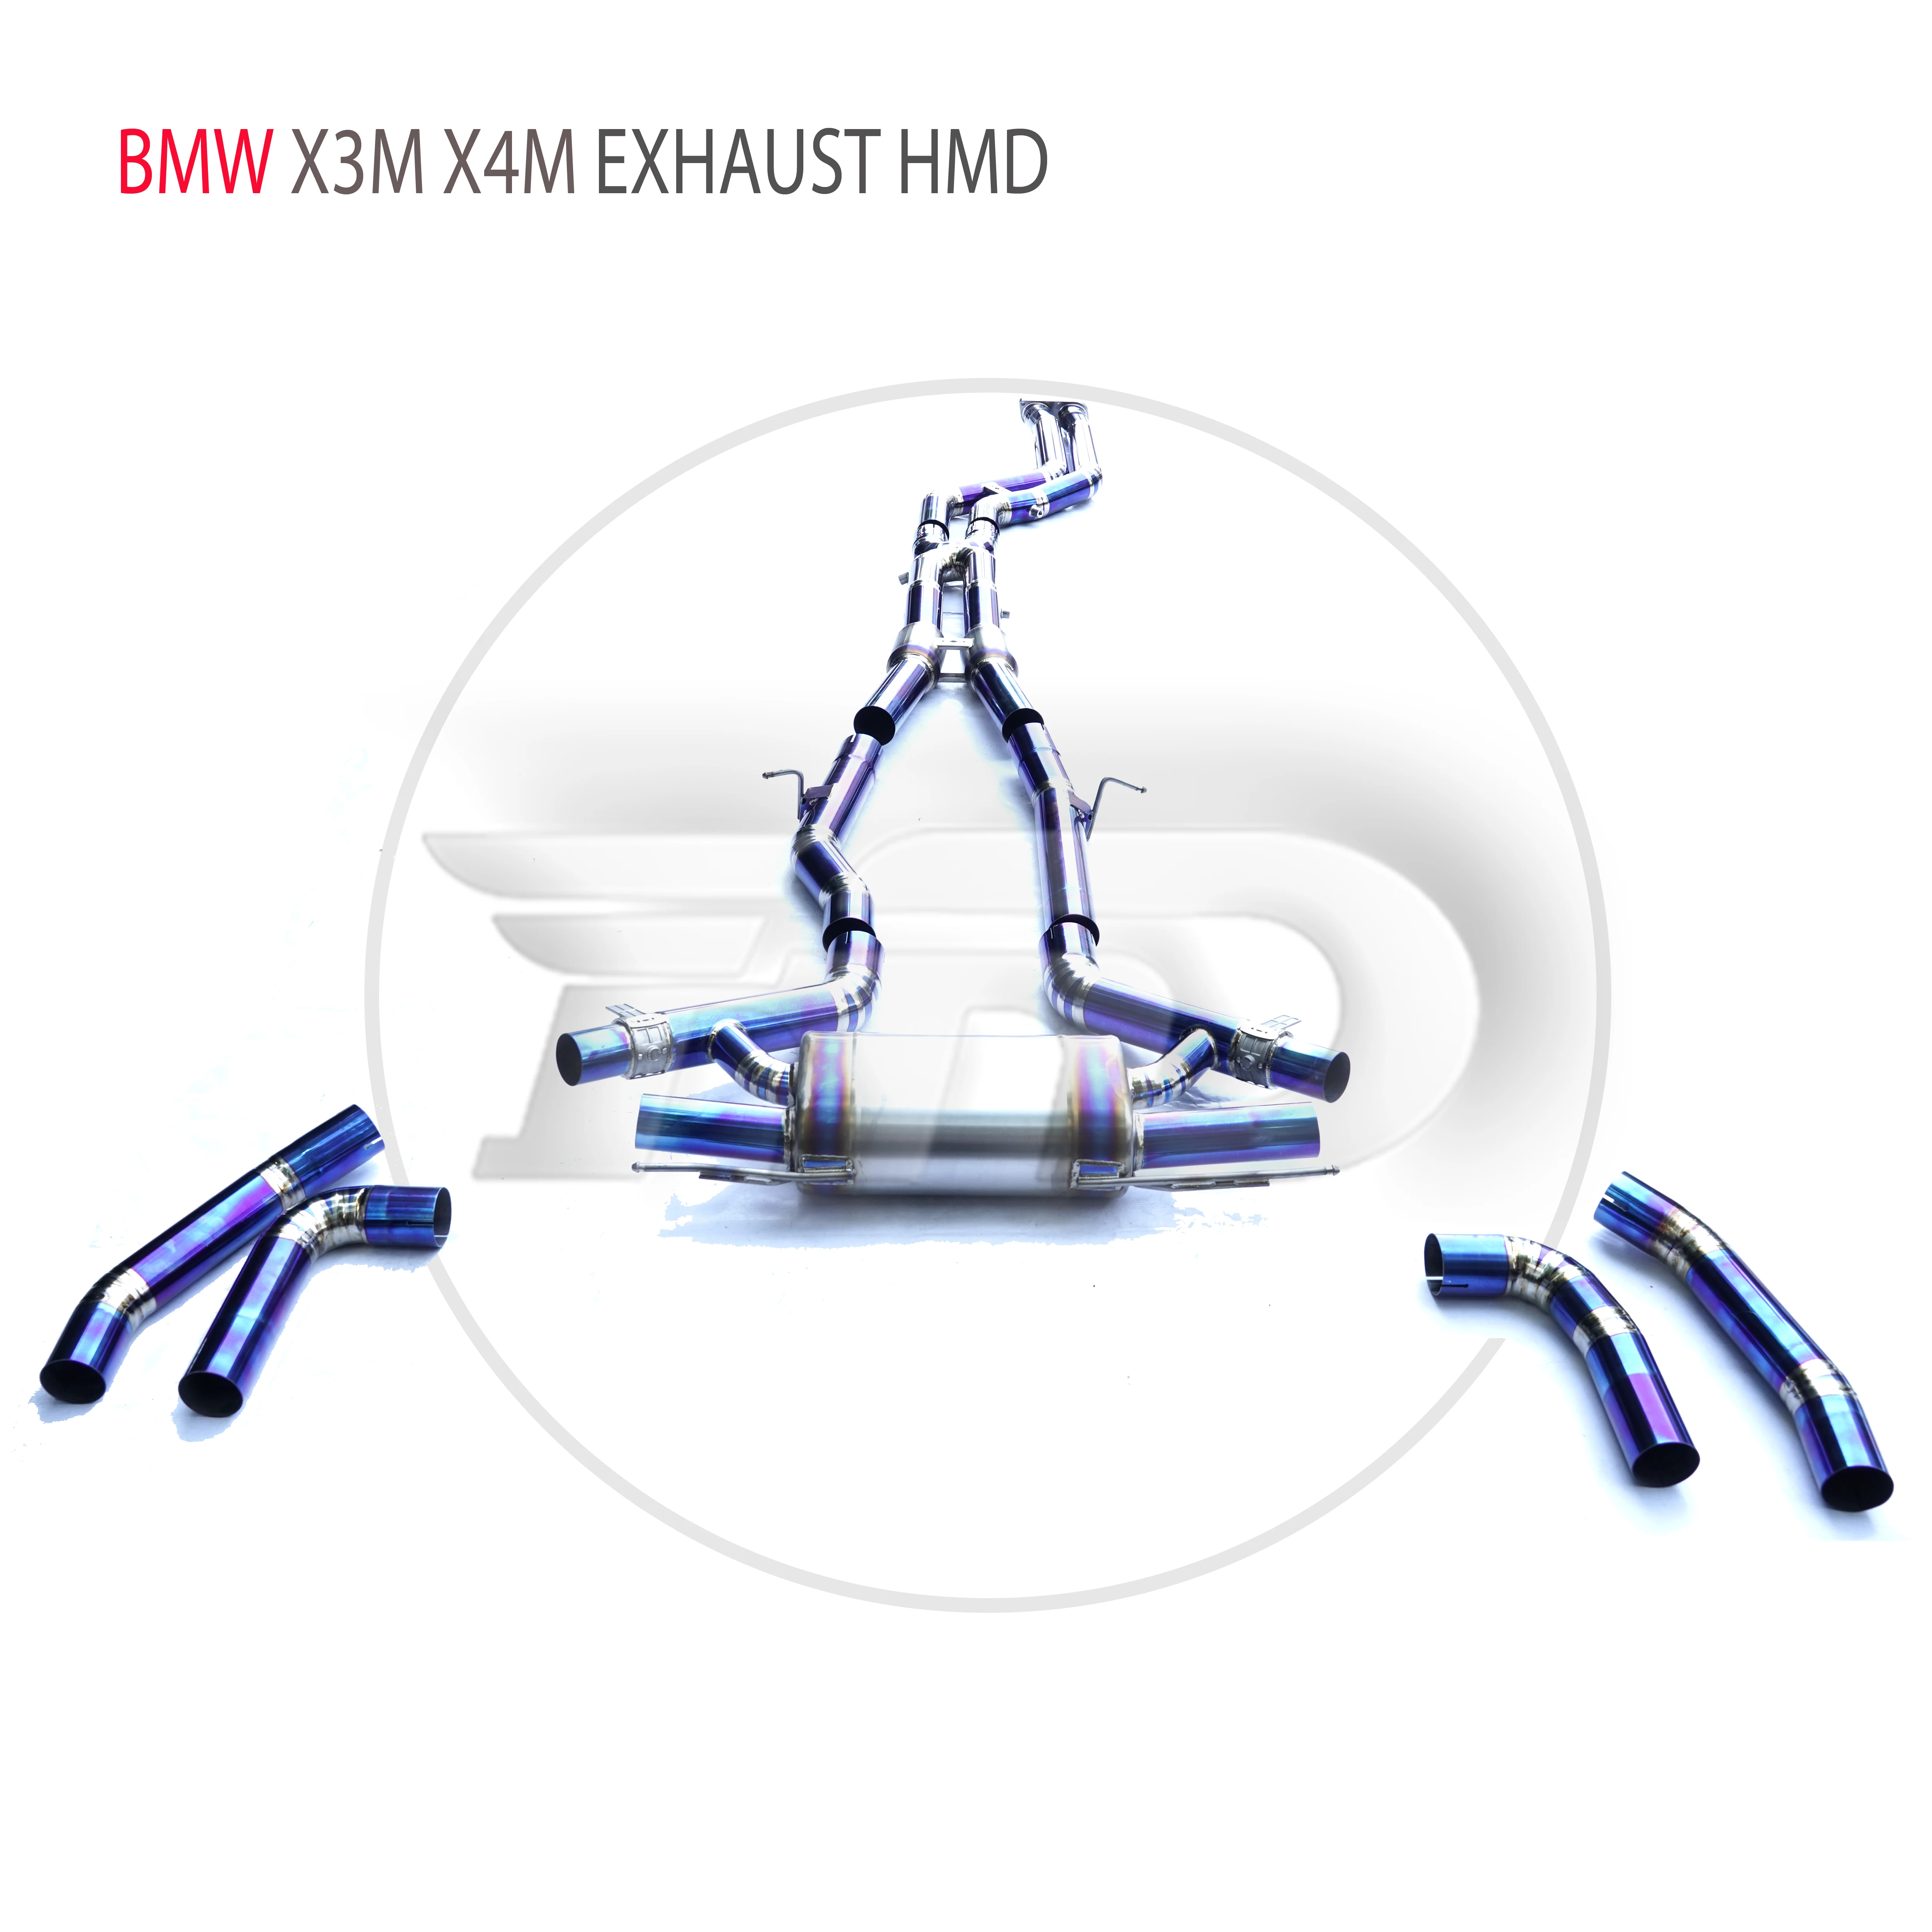 

HMD Titanium Alloy Exhaust System Performance Valve Catback is Suitable For BMW X3M X4M Muffler For Cars